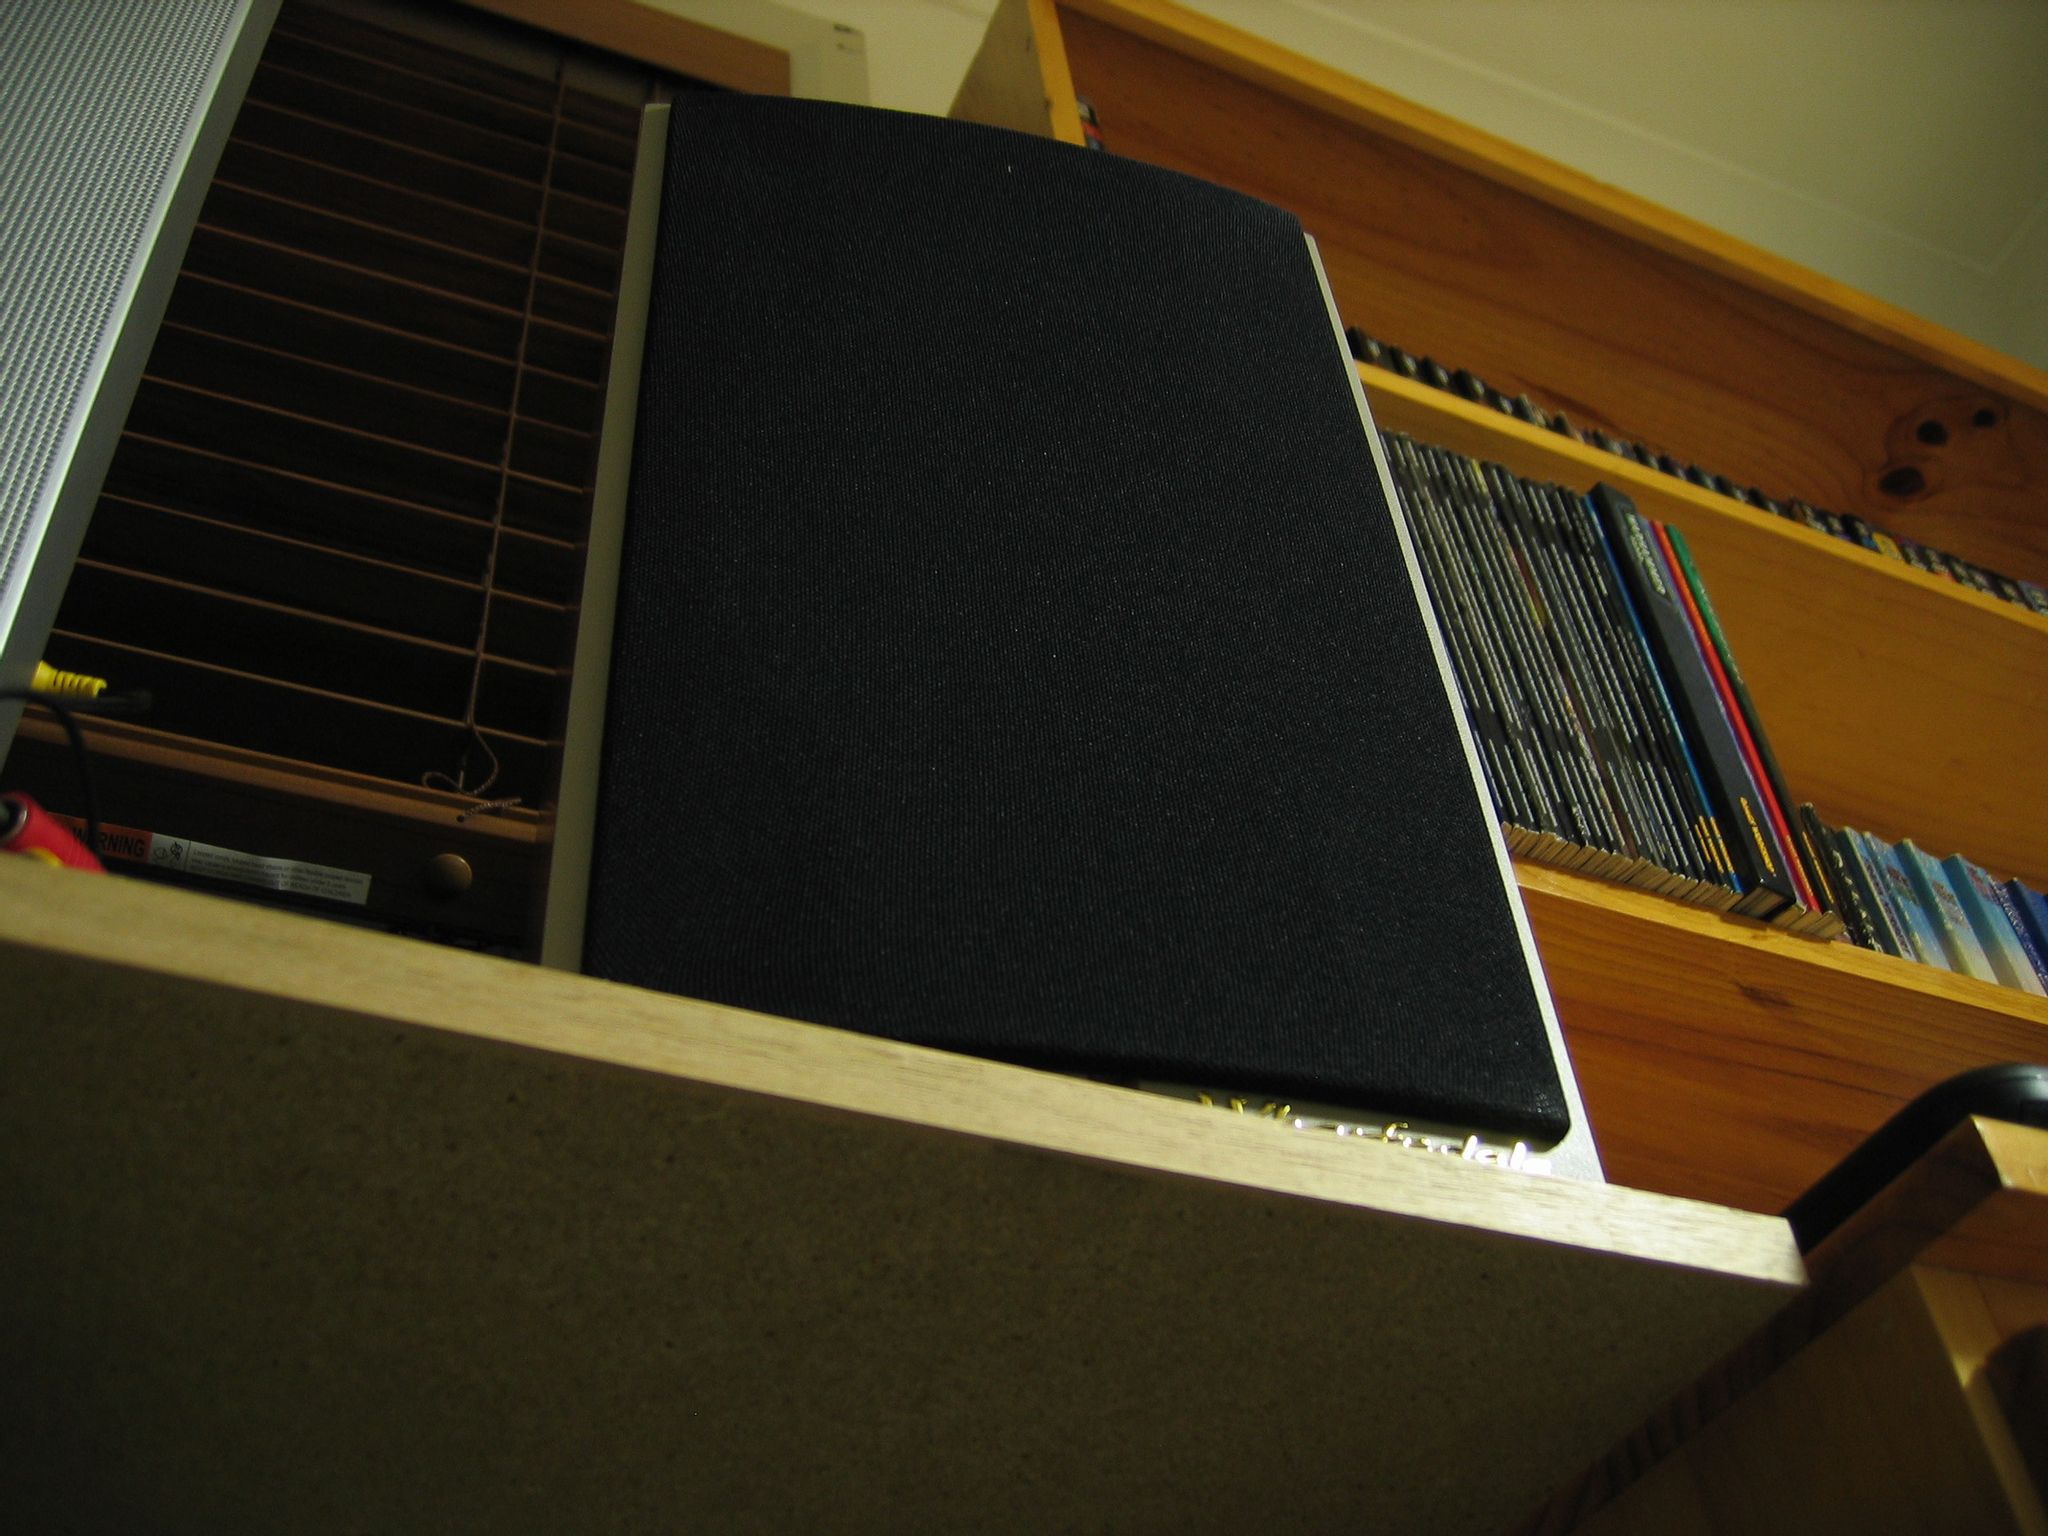 A photo taken looking up at a bookshelf speaker sitting on a shelf, and above and beyond the speaker there's a bookshelf visible with books on it.